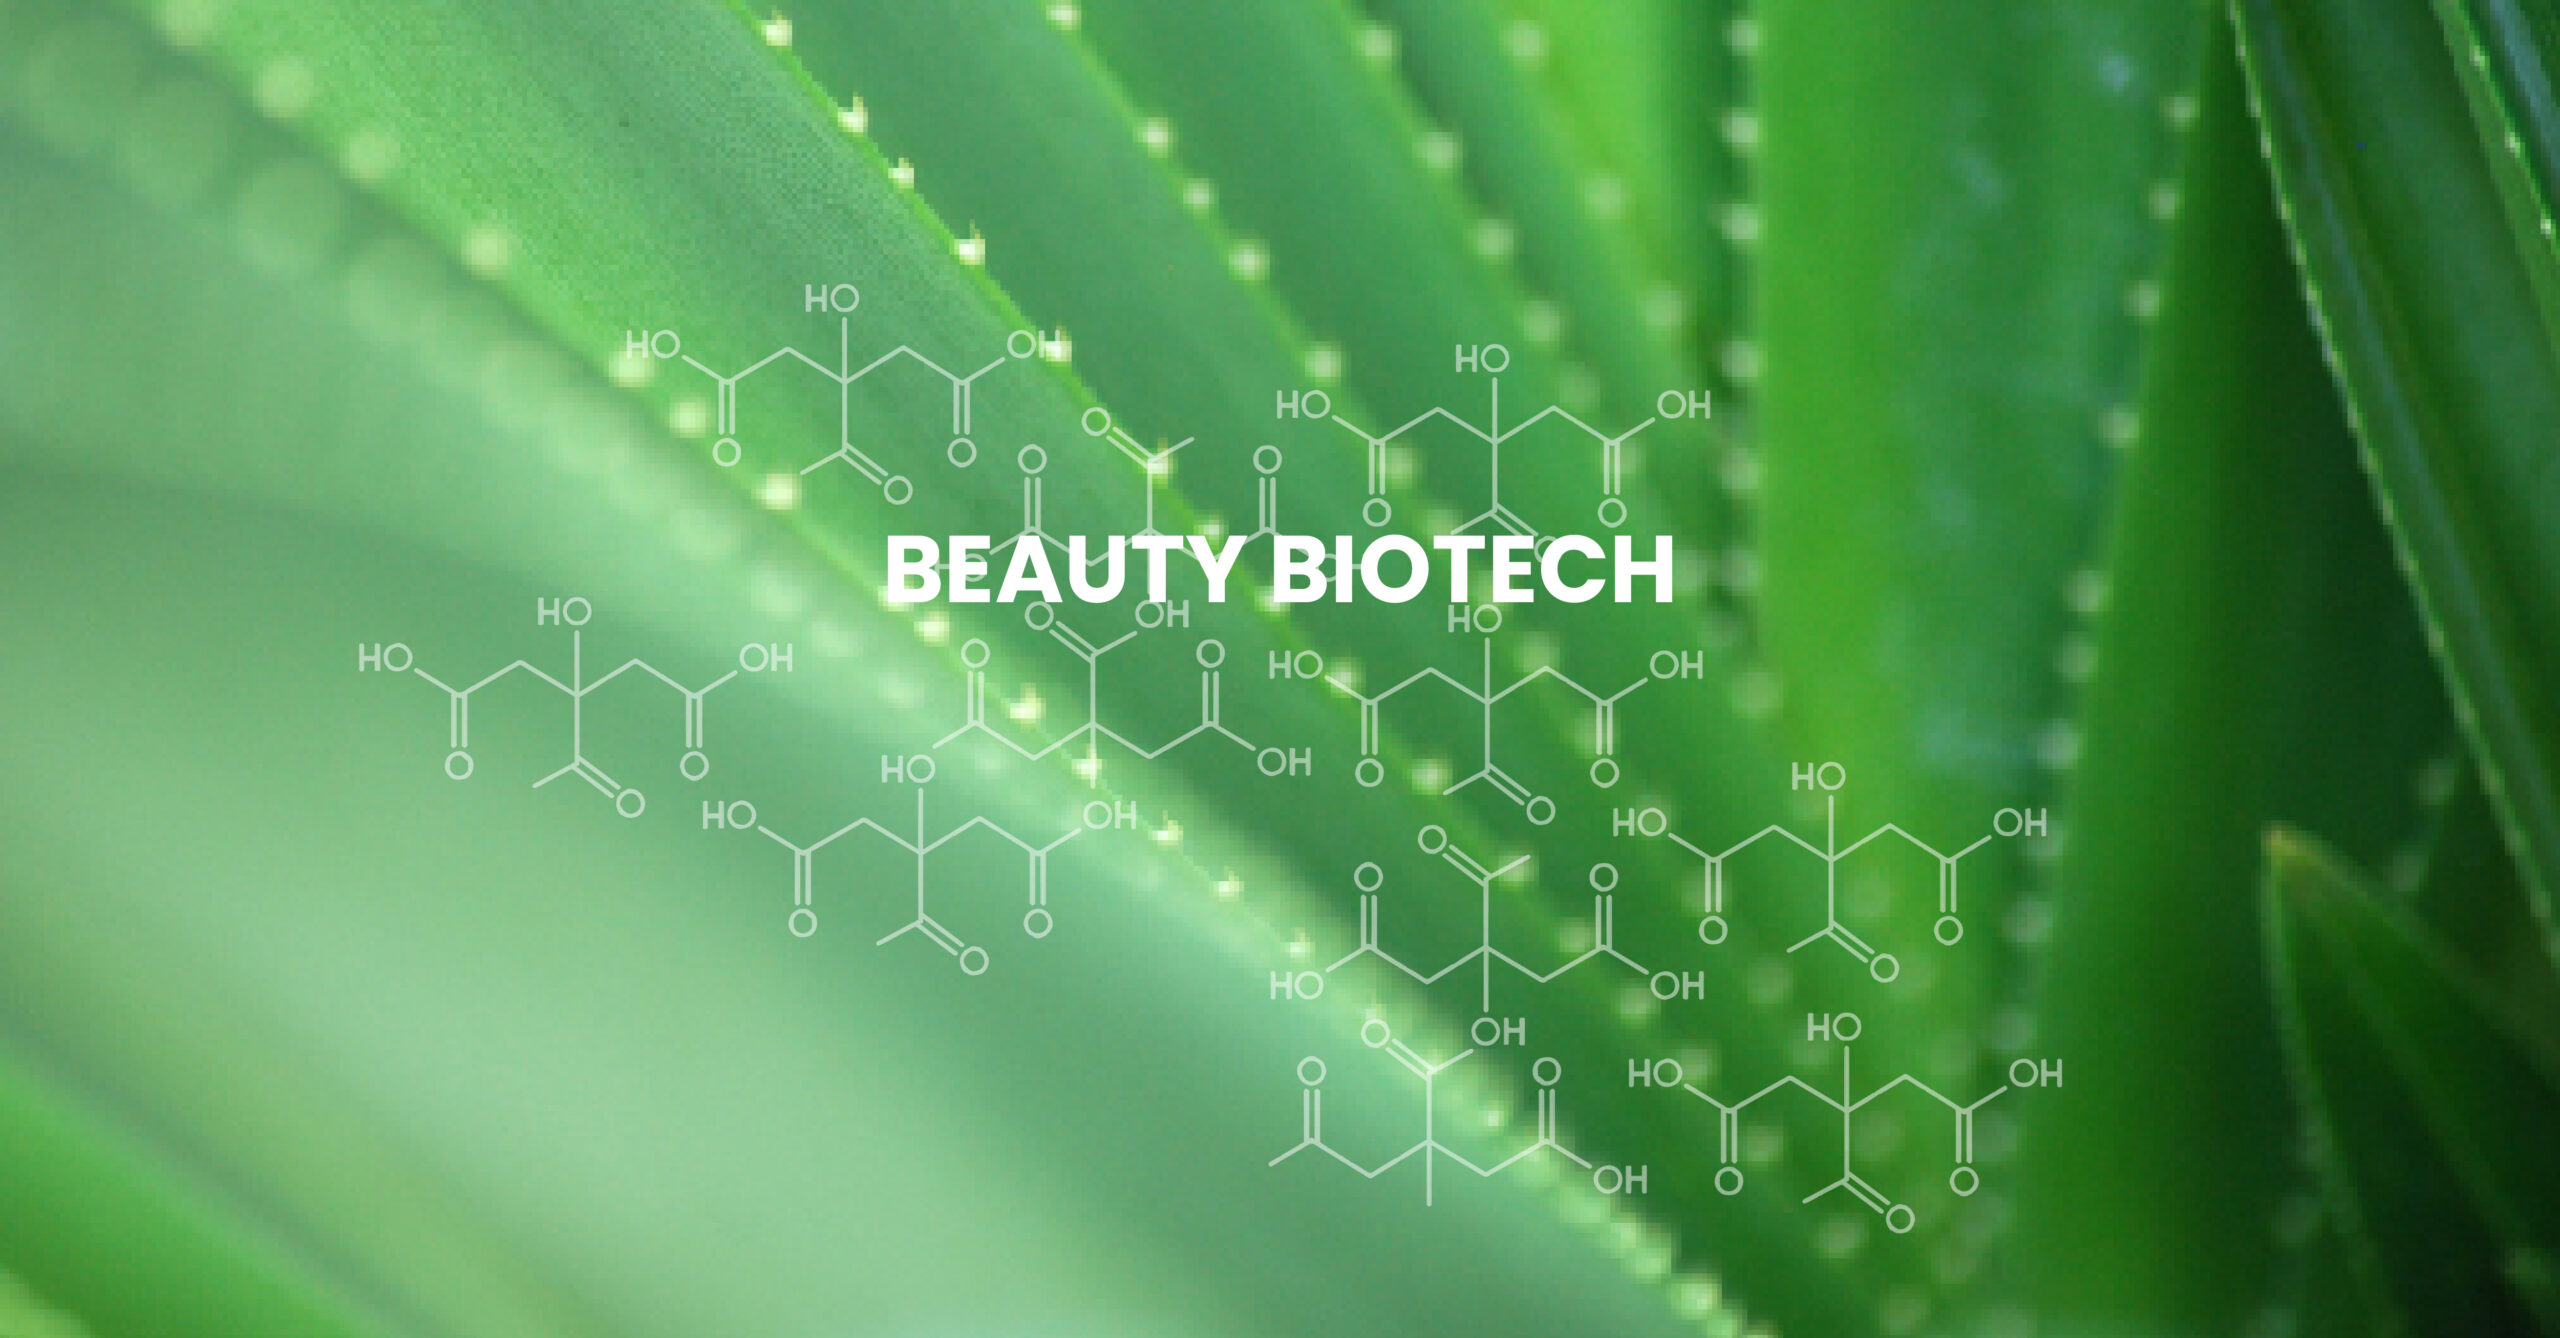 You are currently viewing Our origin story: From Nature’s Riches to Sustainable Beauty